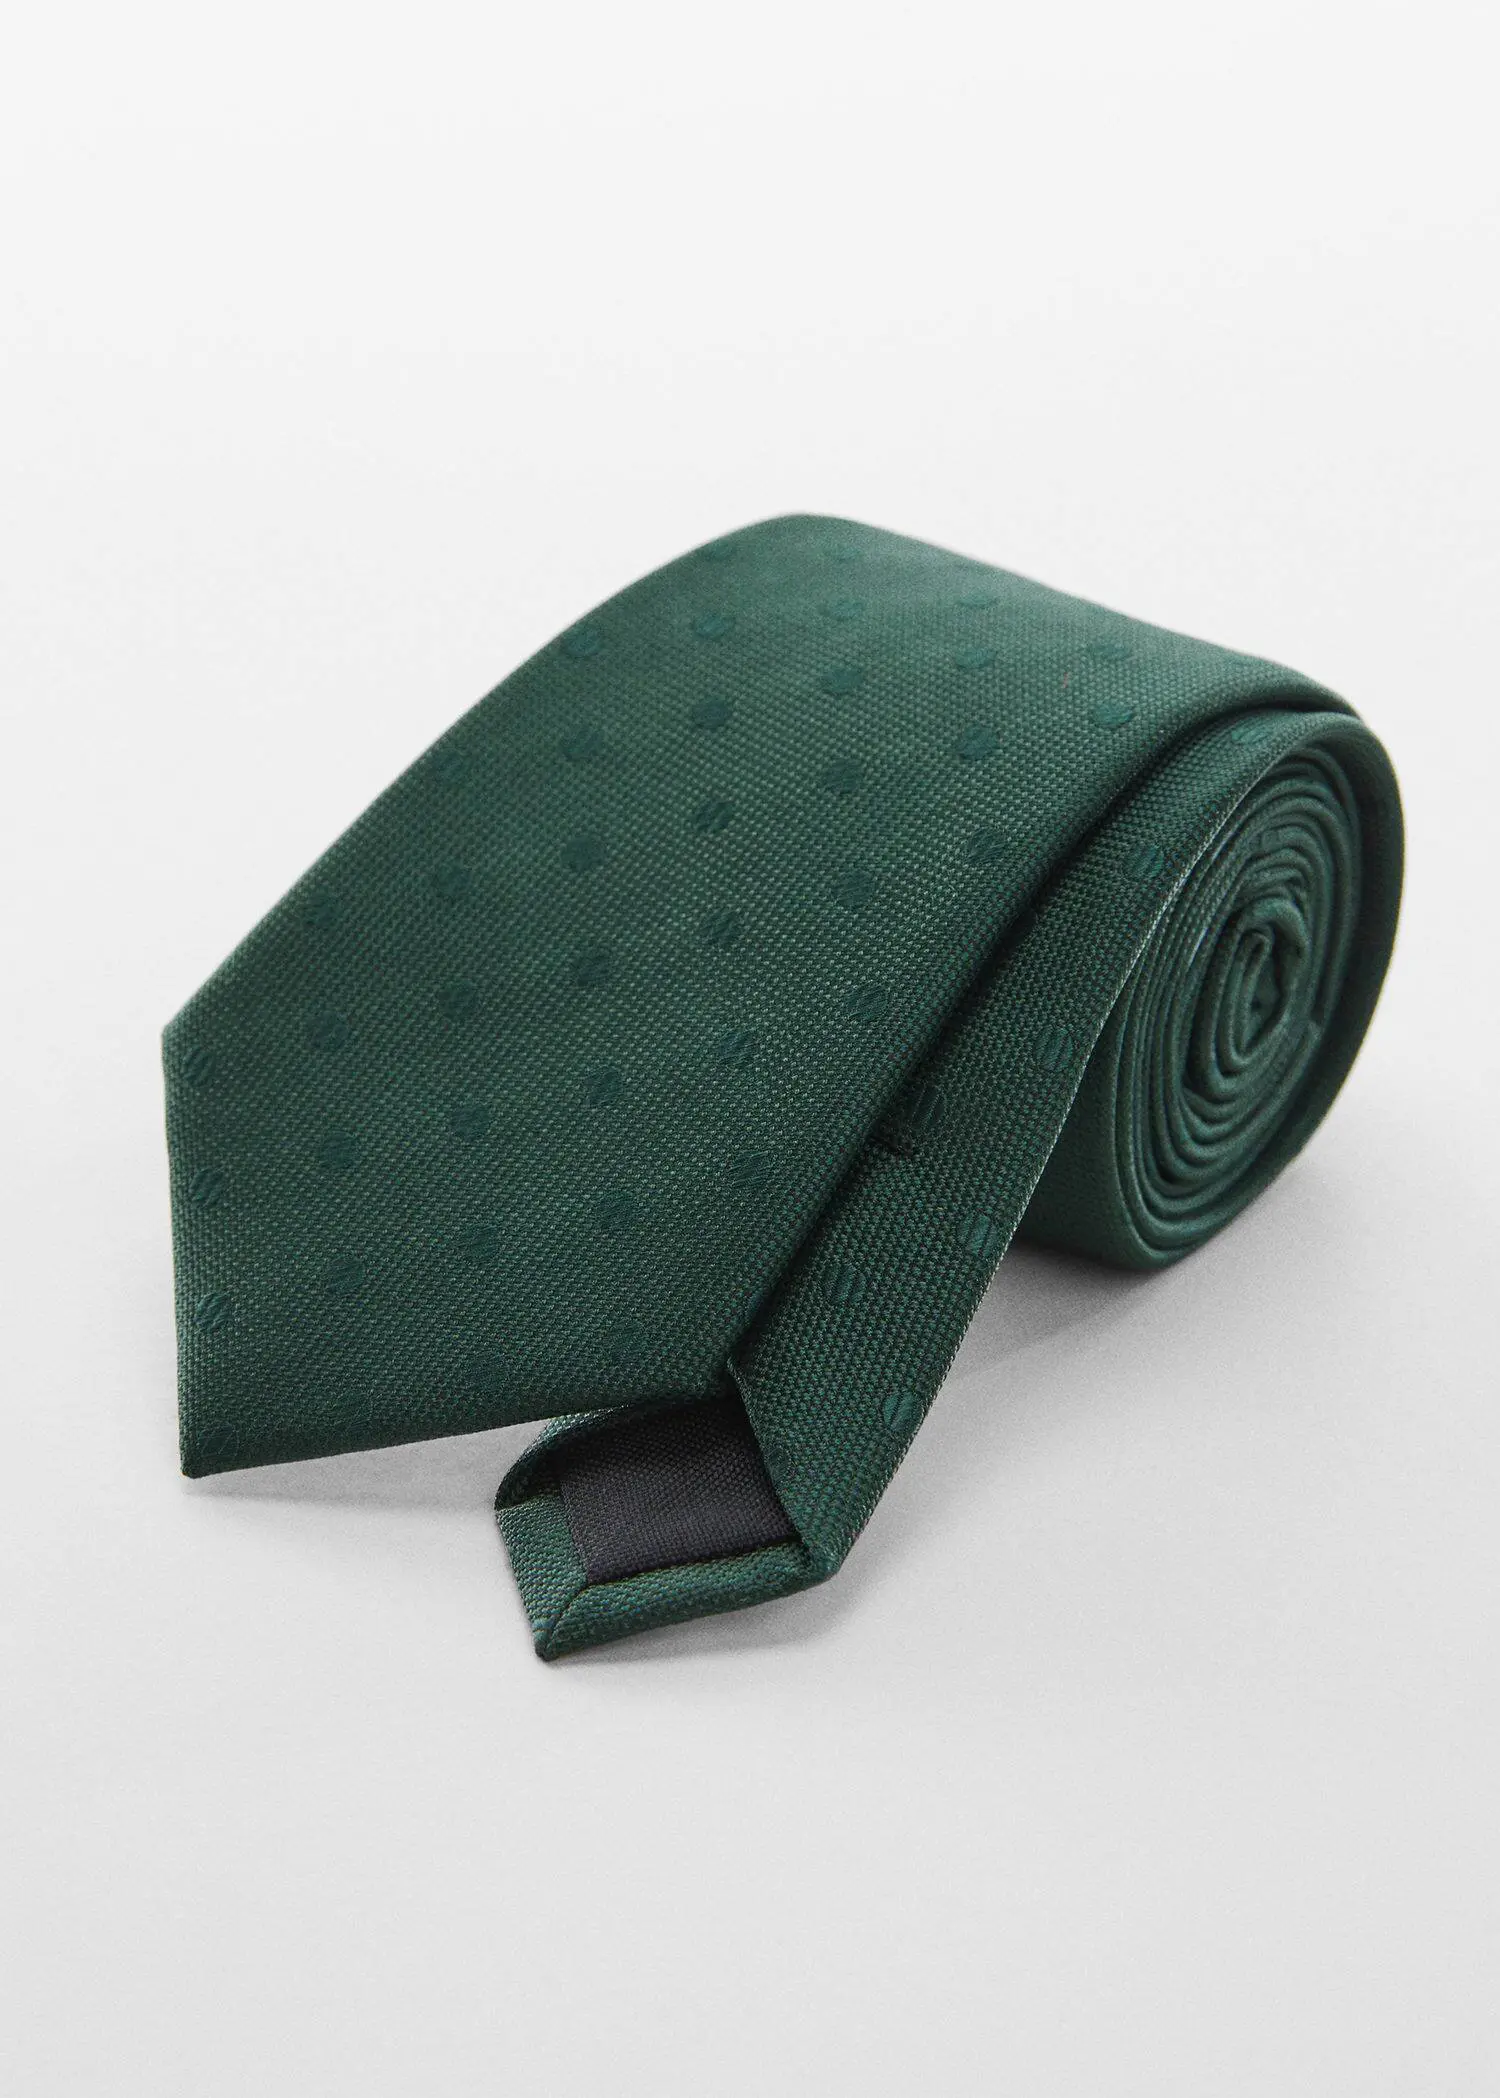 Mango Micro-print tie. a close up of a green tie on a white surface 